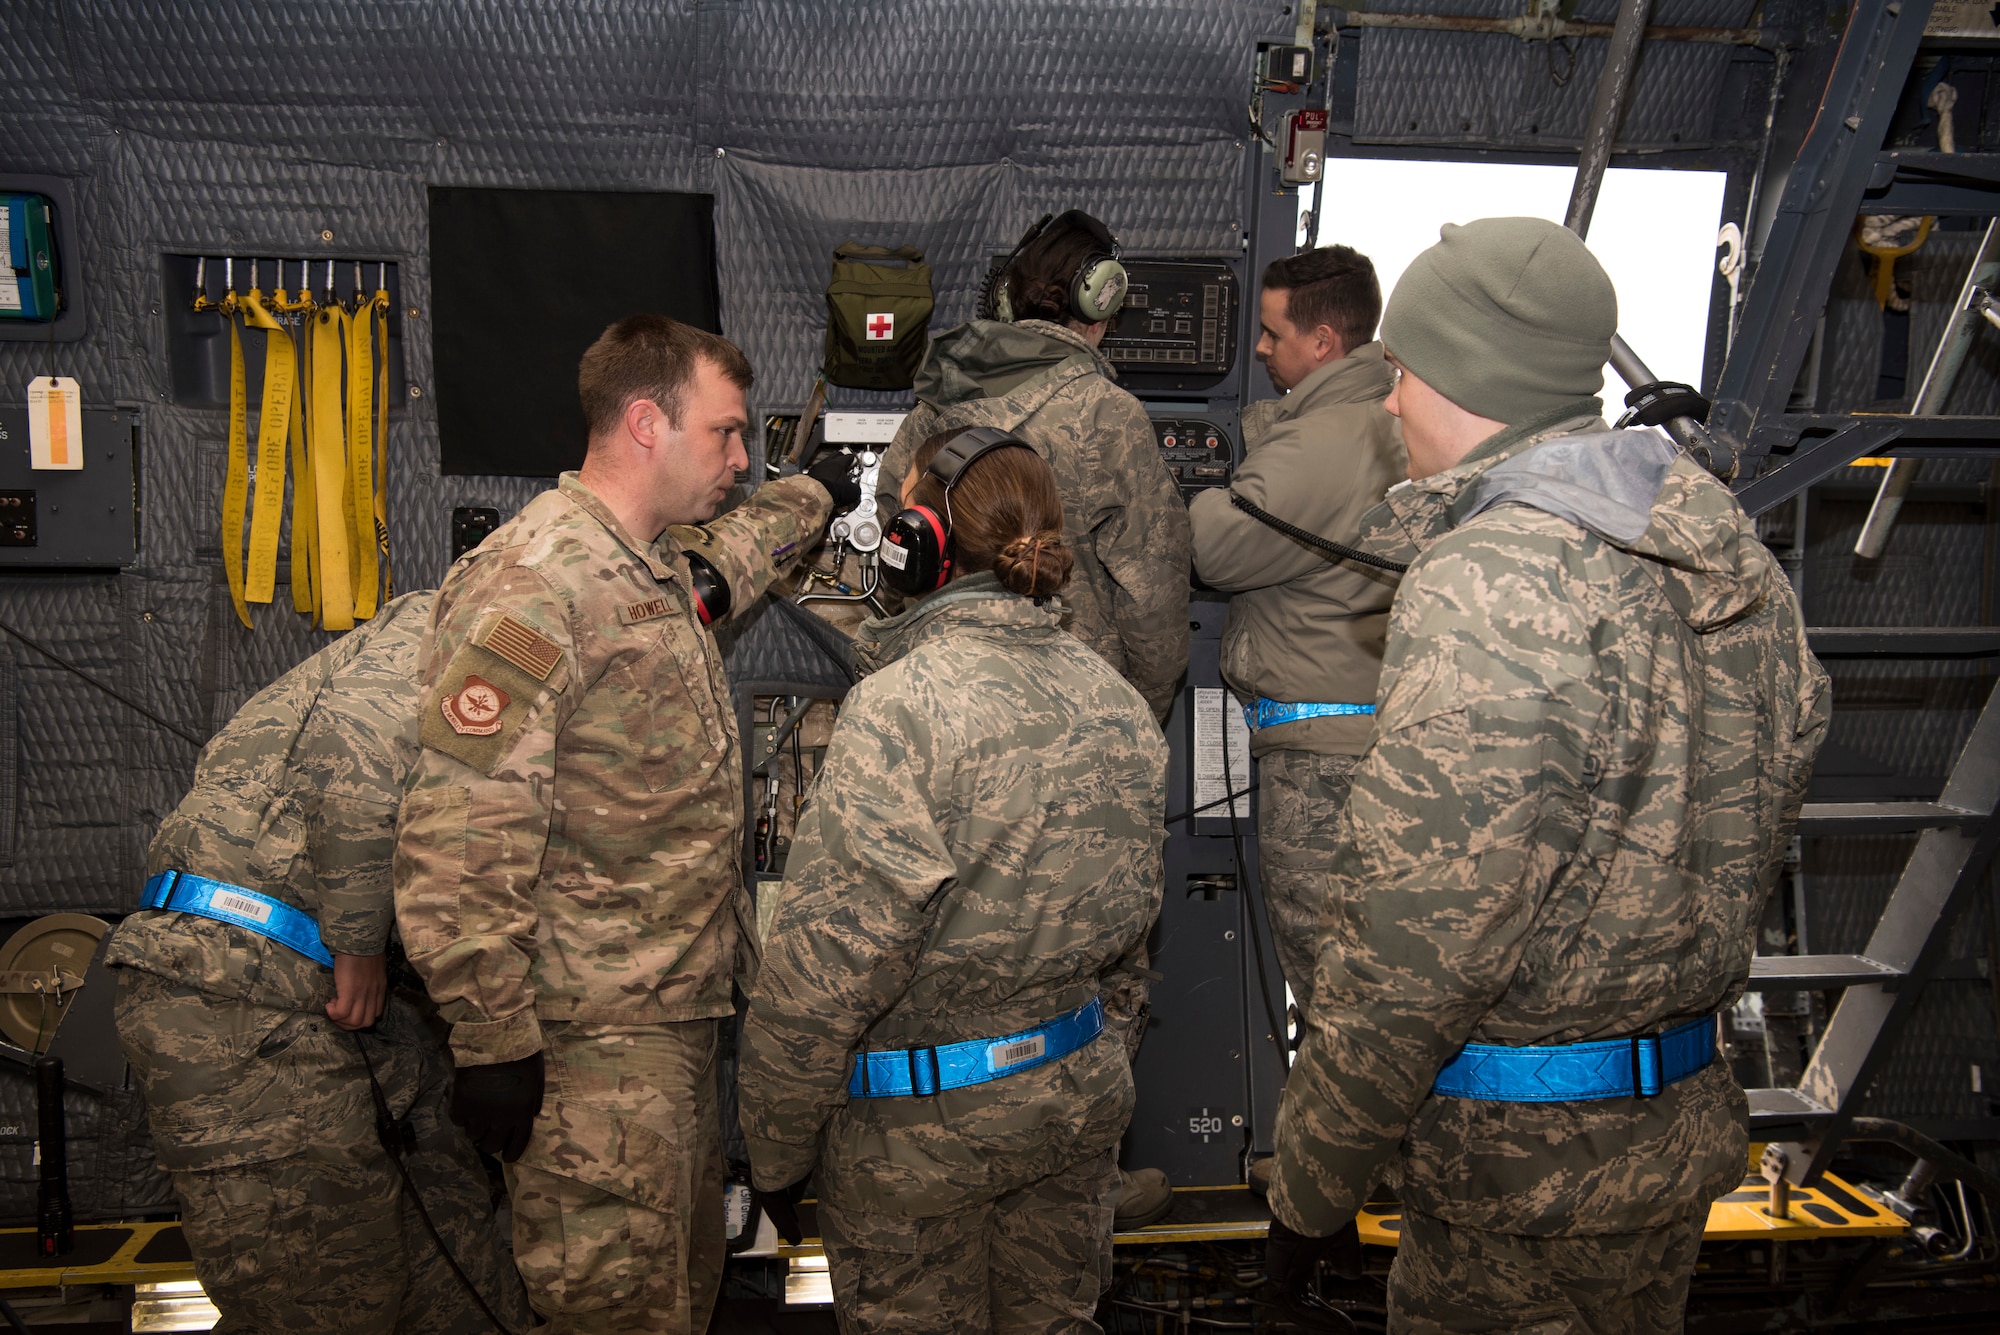 Instructors from the 521st Air Mobility Operations Wing regional training center answer questions aboard a C-5M Super Galaxy aircraft at Ramstein Air Base, Germany, Nov. 29, 2018. Nearly 60 aircraft maintainers and 30 aerial port personnel attended the two-week training intended to improve proficiency on C-5 maintenance throughout the 521st AMOW’s nearly 20 geographically separated units. (U.S. Air Force photo by Staff Sgt. Aaron J. Jenne)